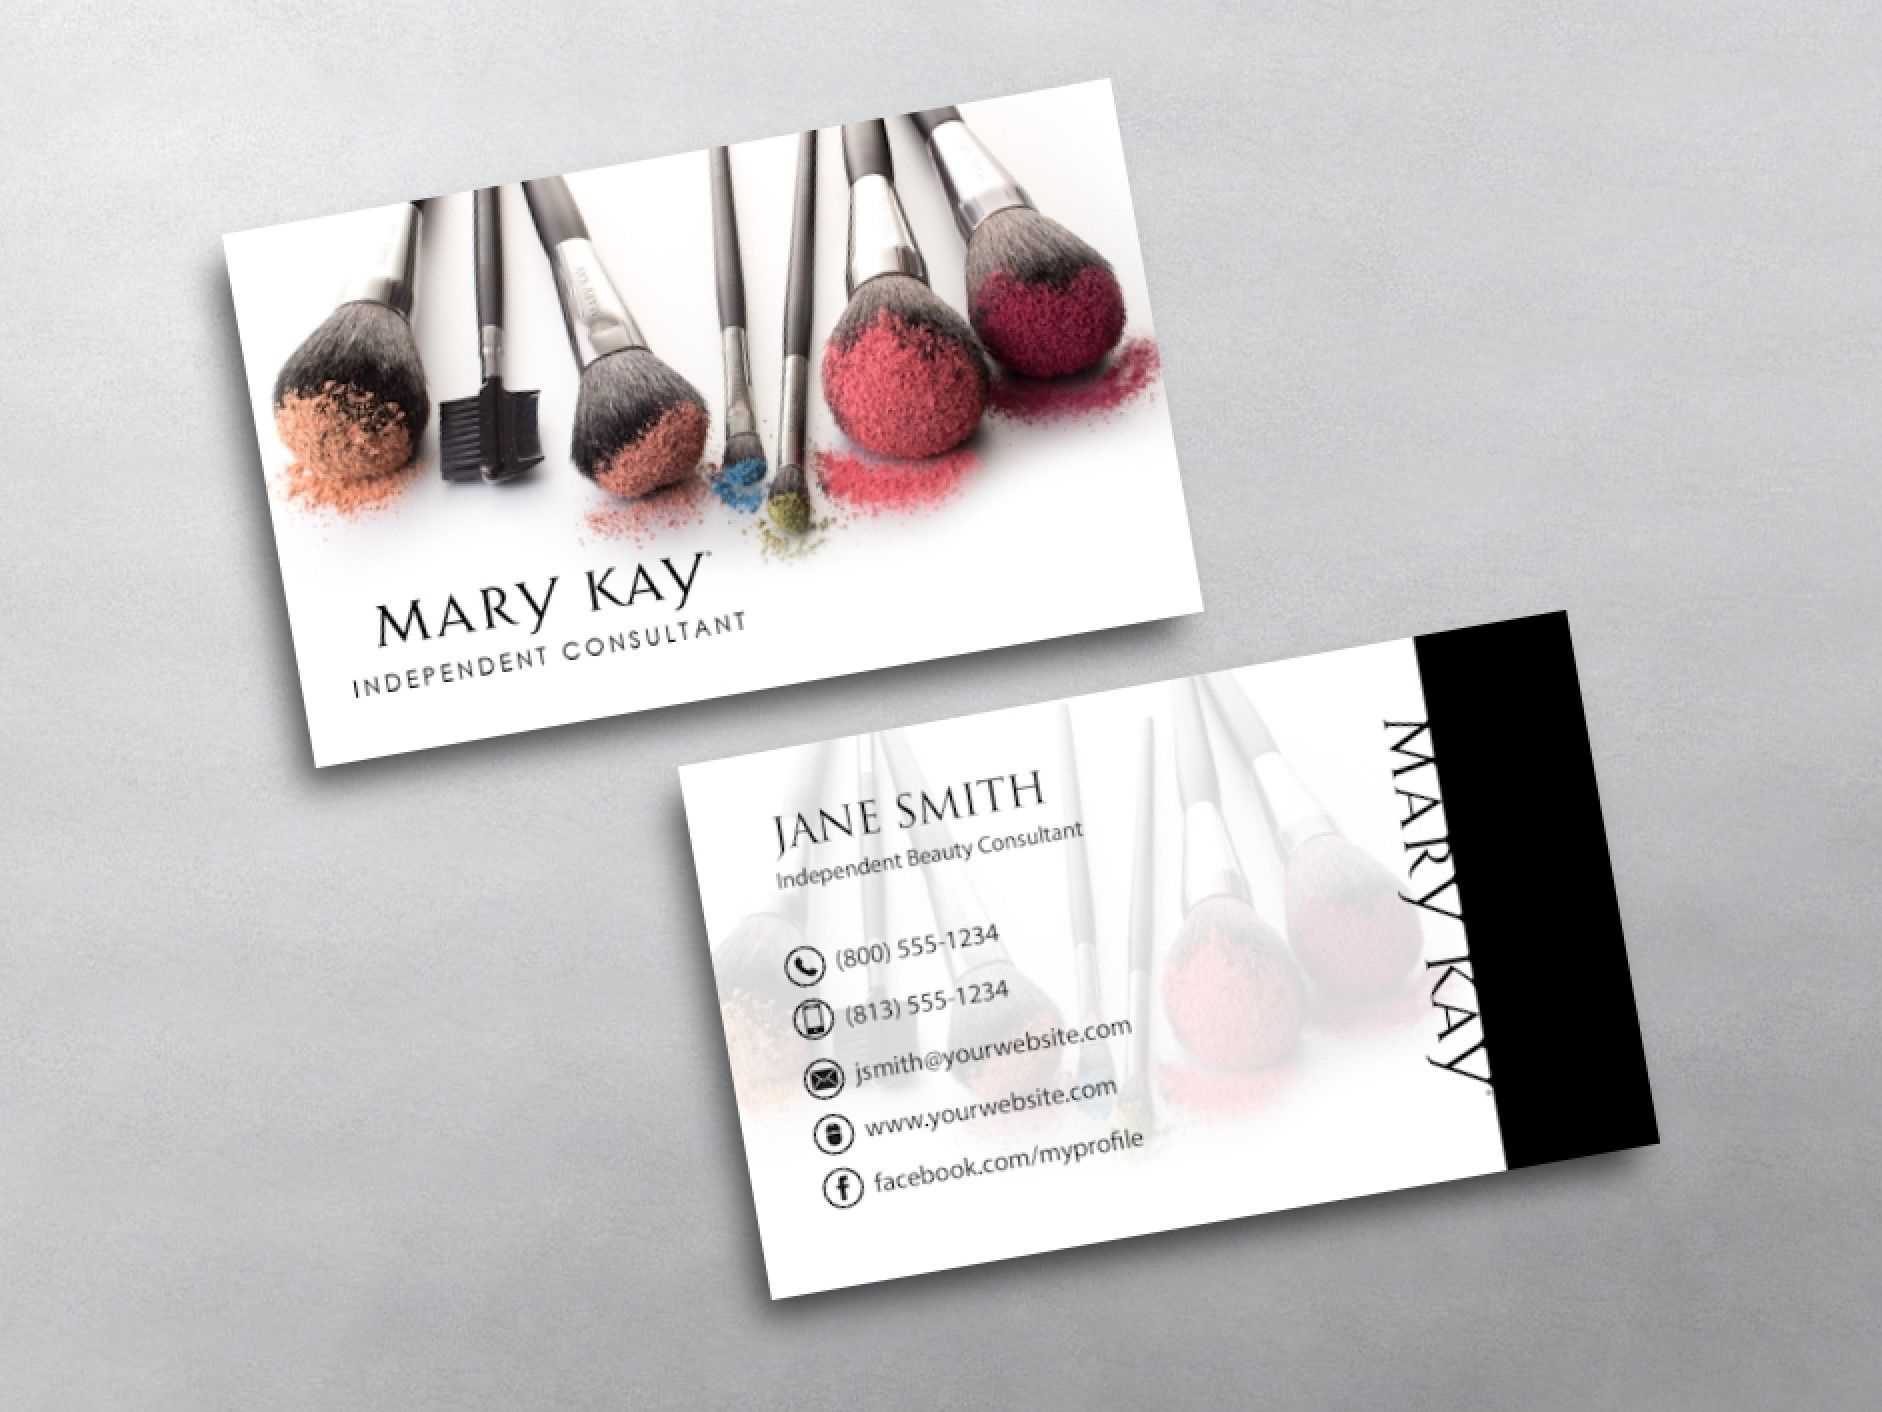 Mary Kay Business Cards In 2019 | Mary Kay, Makeup Artist Pertaining To Mary Kay Business Cards Templates Free